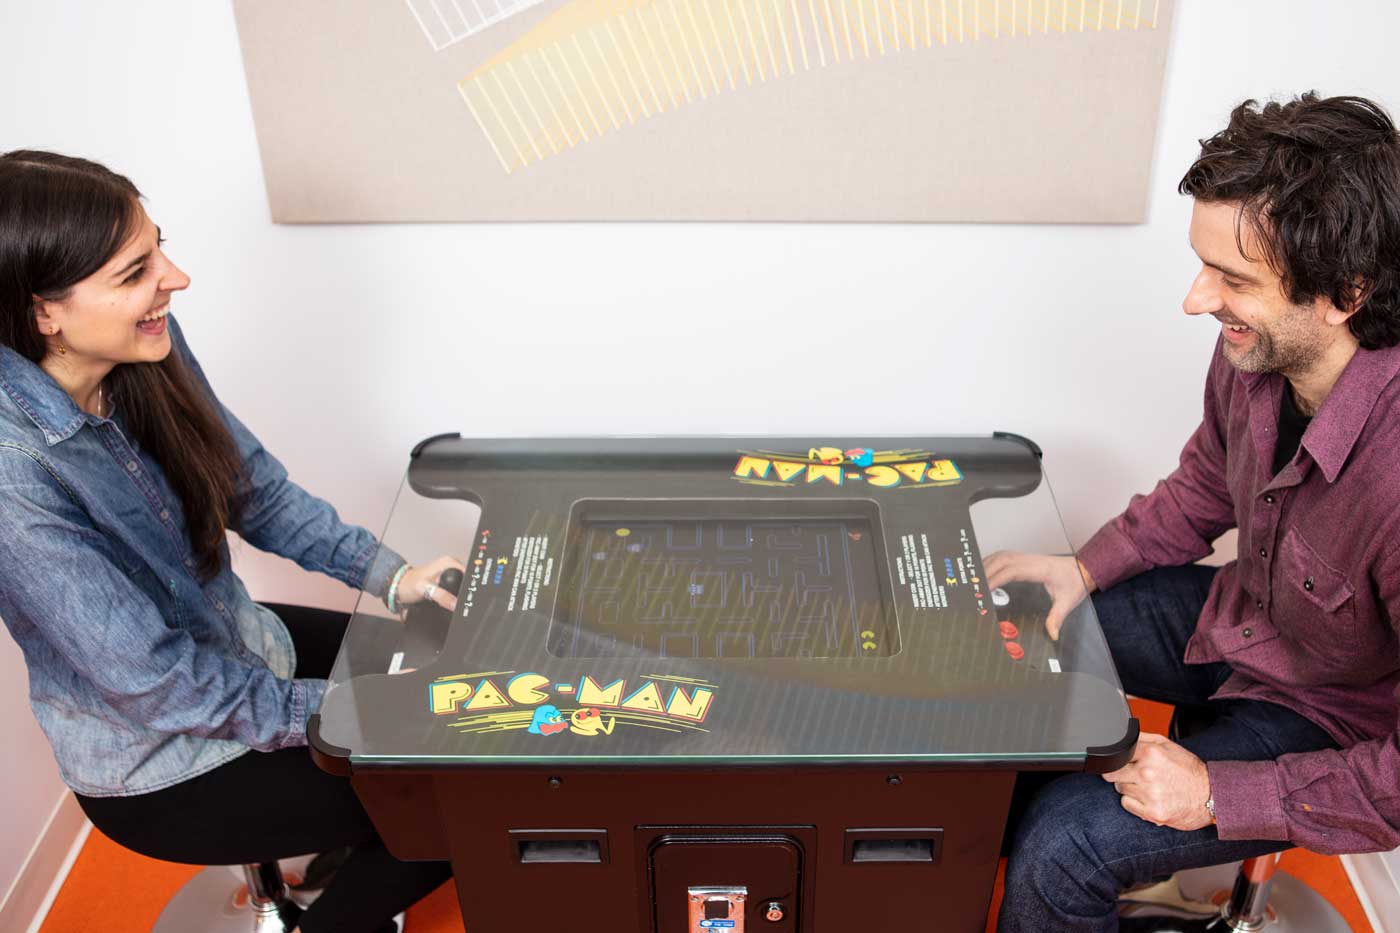 Two colleagues playing PacMan and laughing together.